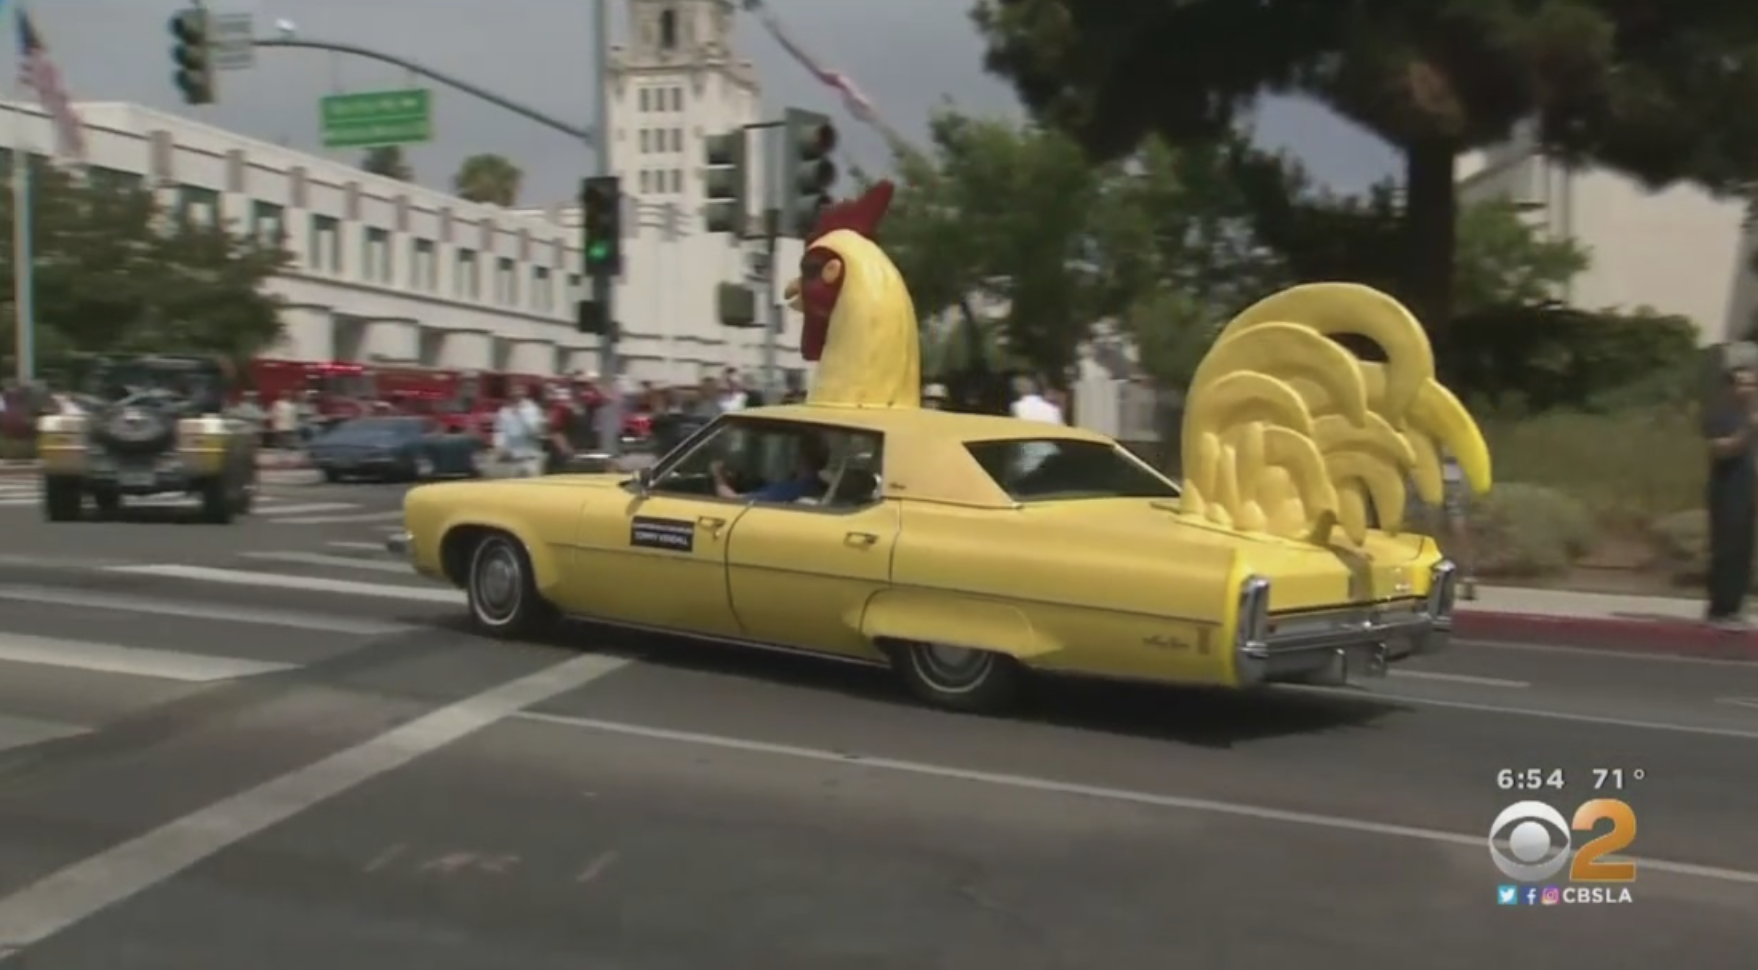 Spectators Line Up In Beverly Hills To Watch Parade Of Rare Cars, An